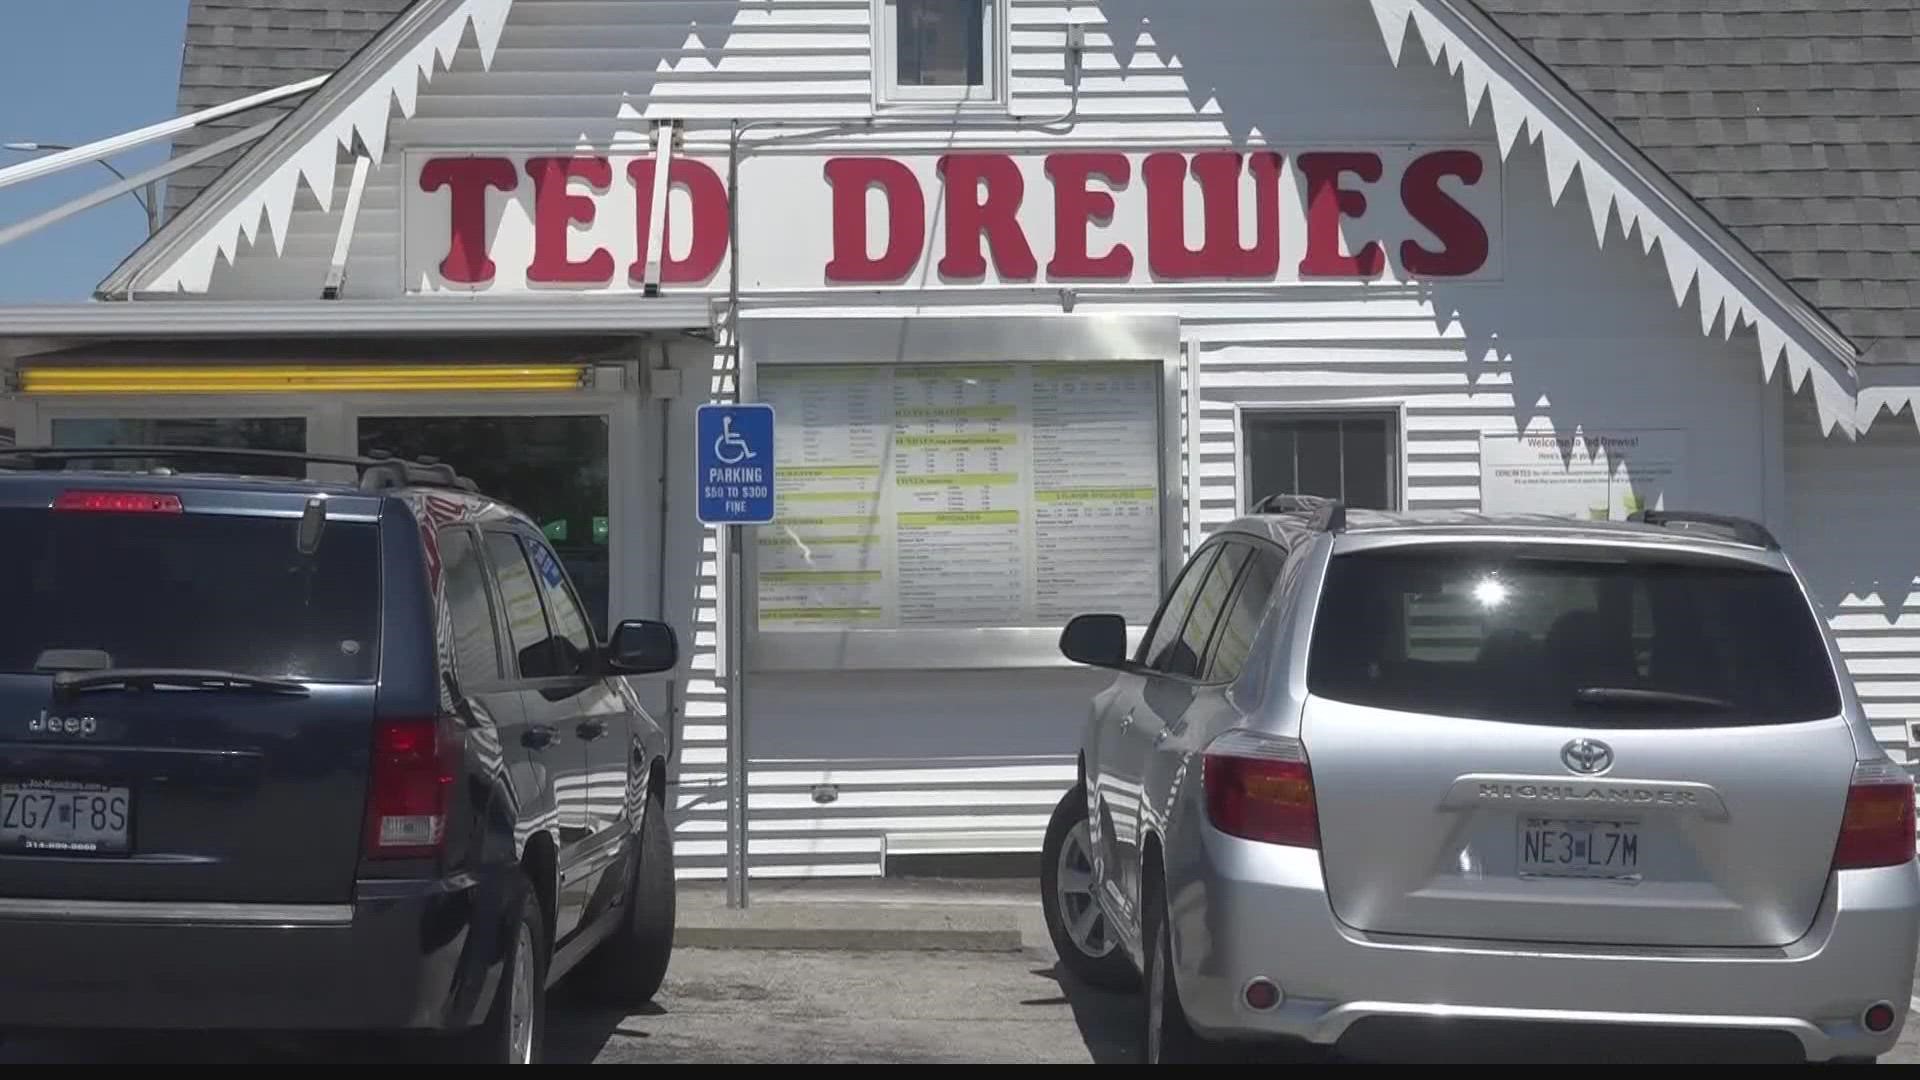 A St. Louis landmark's dealing with some cold, hard facts. They don't have enough staff to open the Ted Drewes on South Grand.